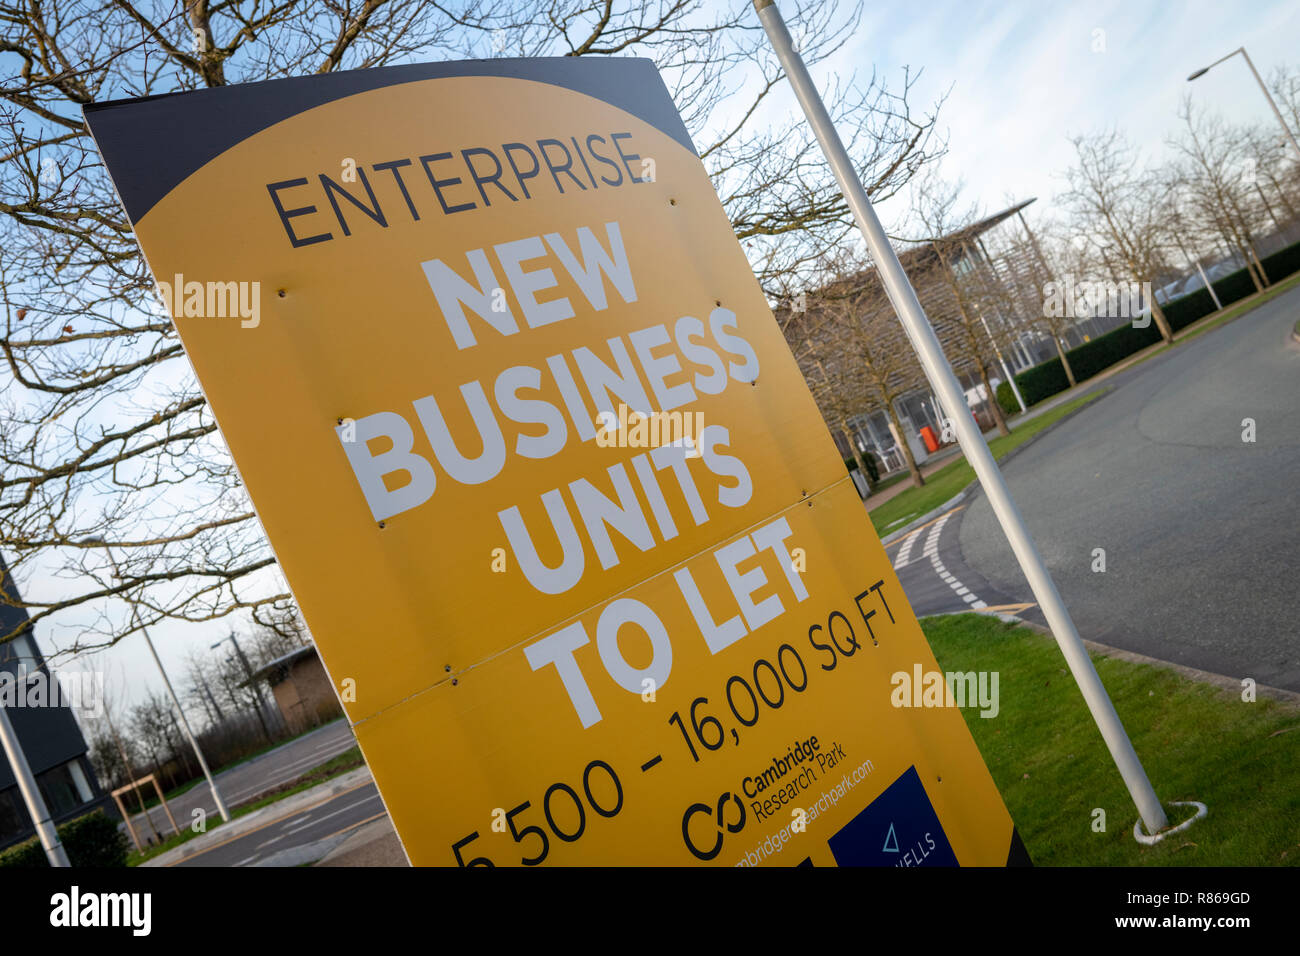 A sign advertising new business units to let at the Cambridge Research Park Waterbeach Cambridgeshire UK bu Enterprise Stock Photo